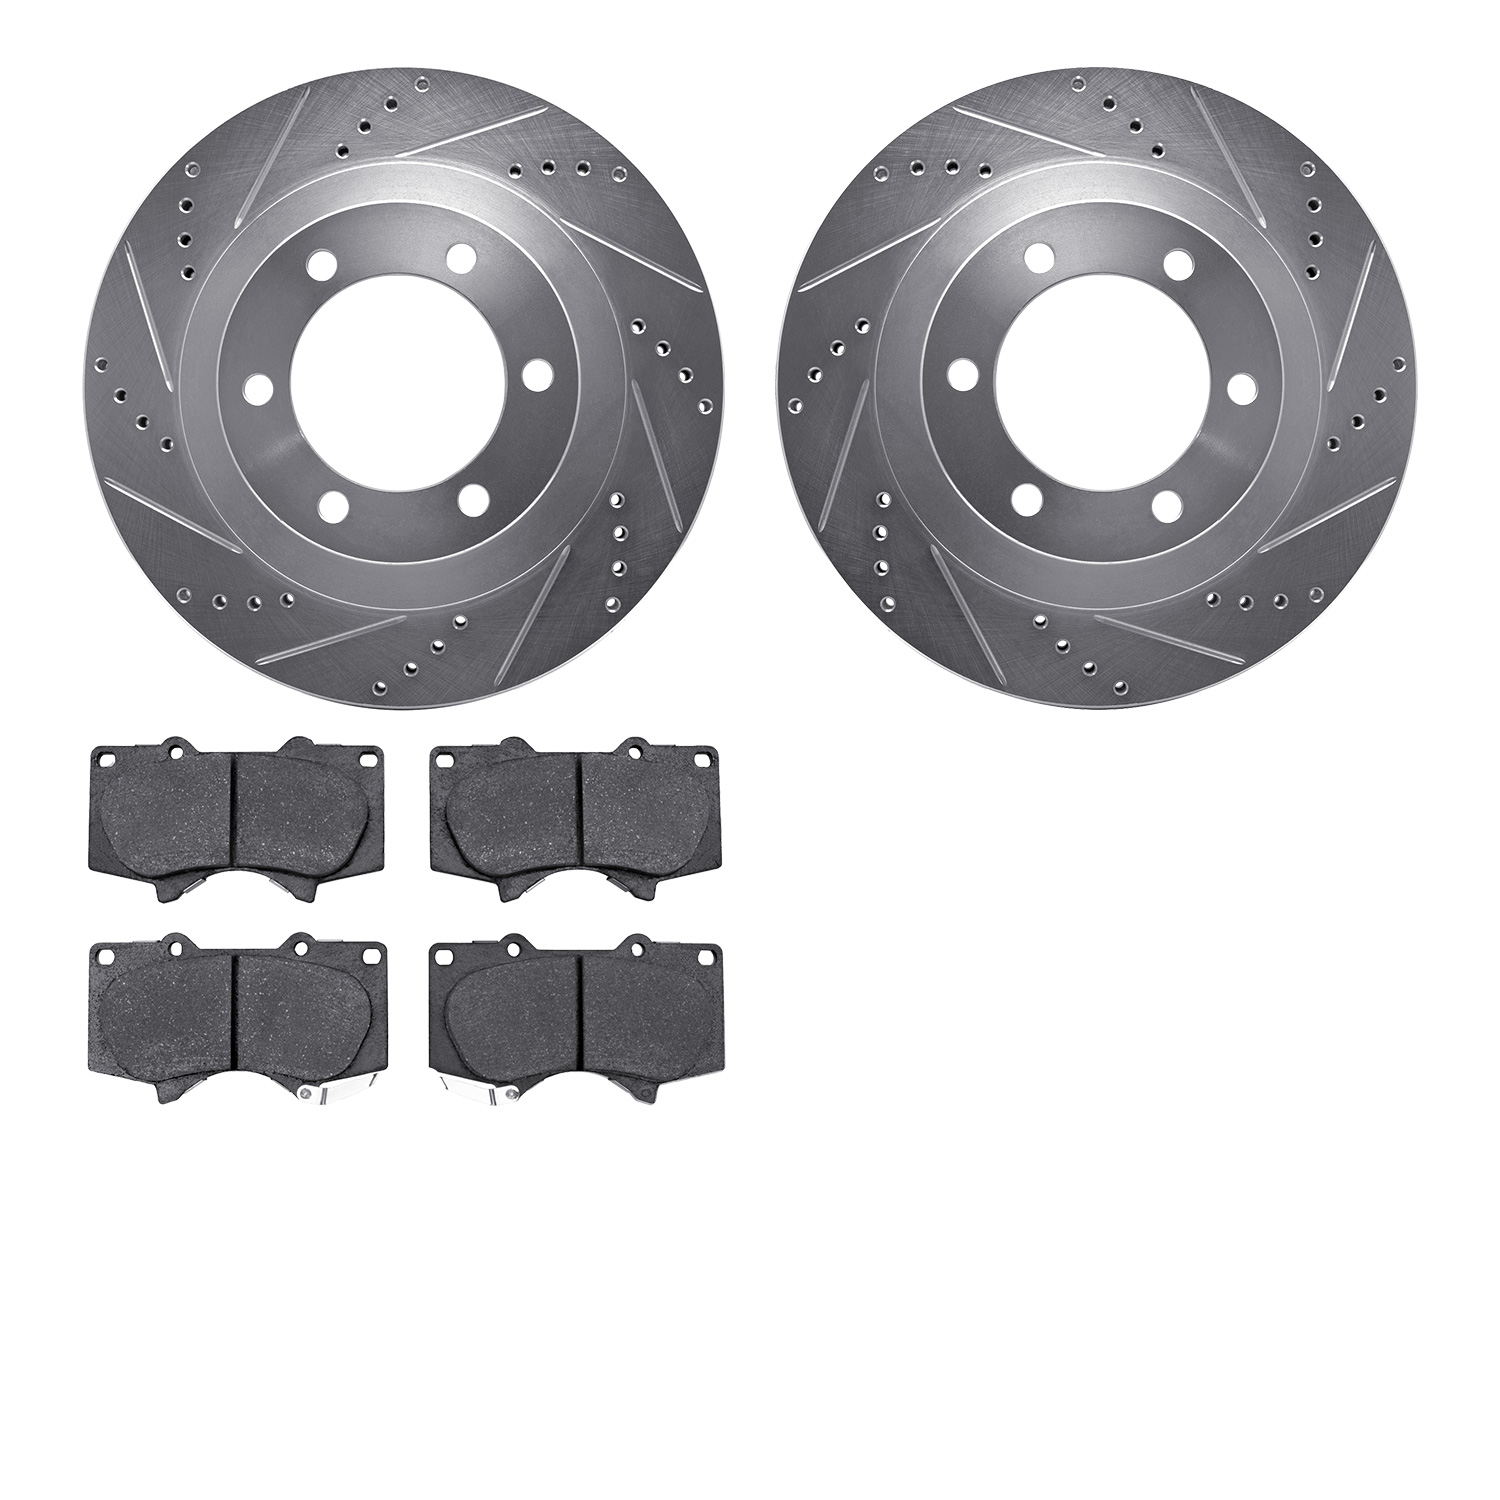 7402-76016 Drilled/Slotted Brake Rotors with Ultimate-Duty Brake Pads Kit [Silver], 2003-2009 Lexus/Toyota/Scion, Position: Fron